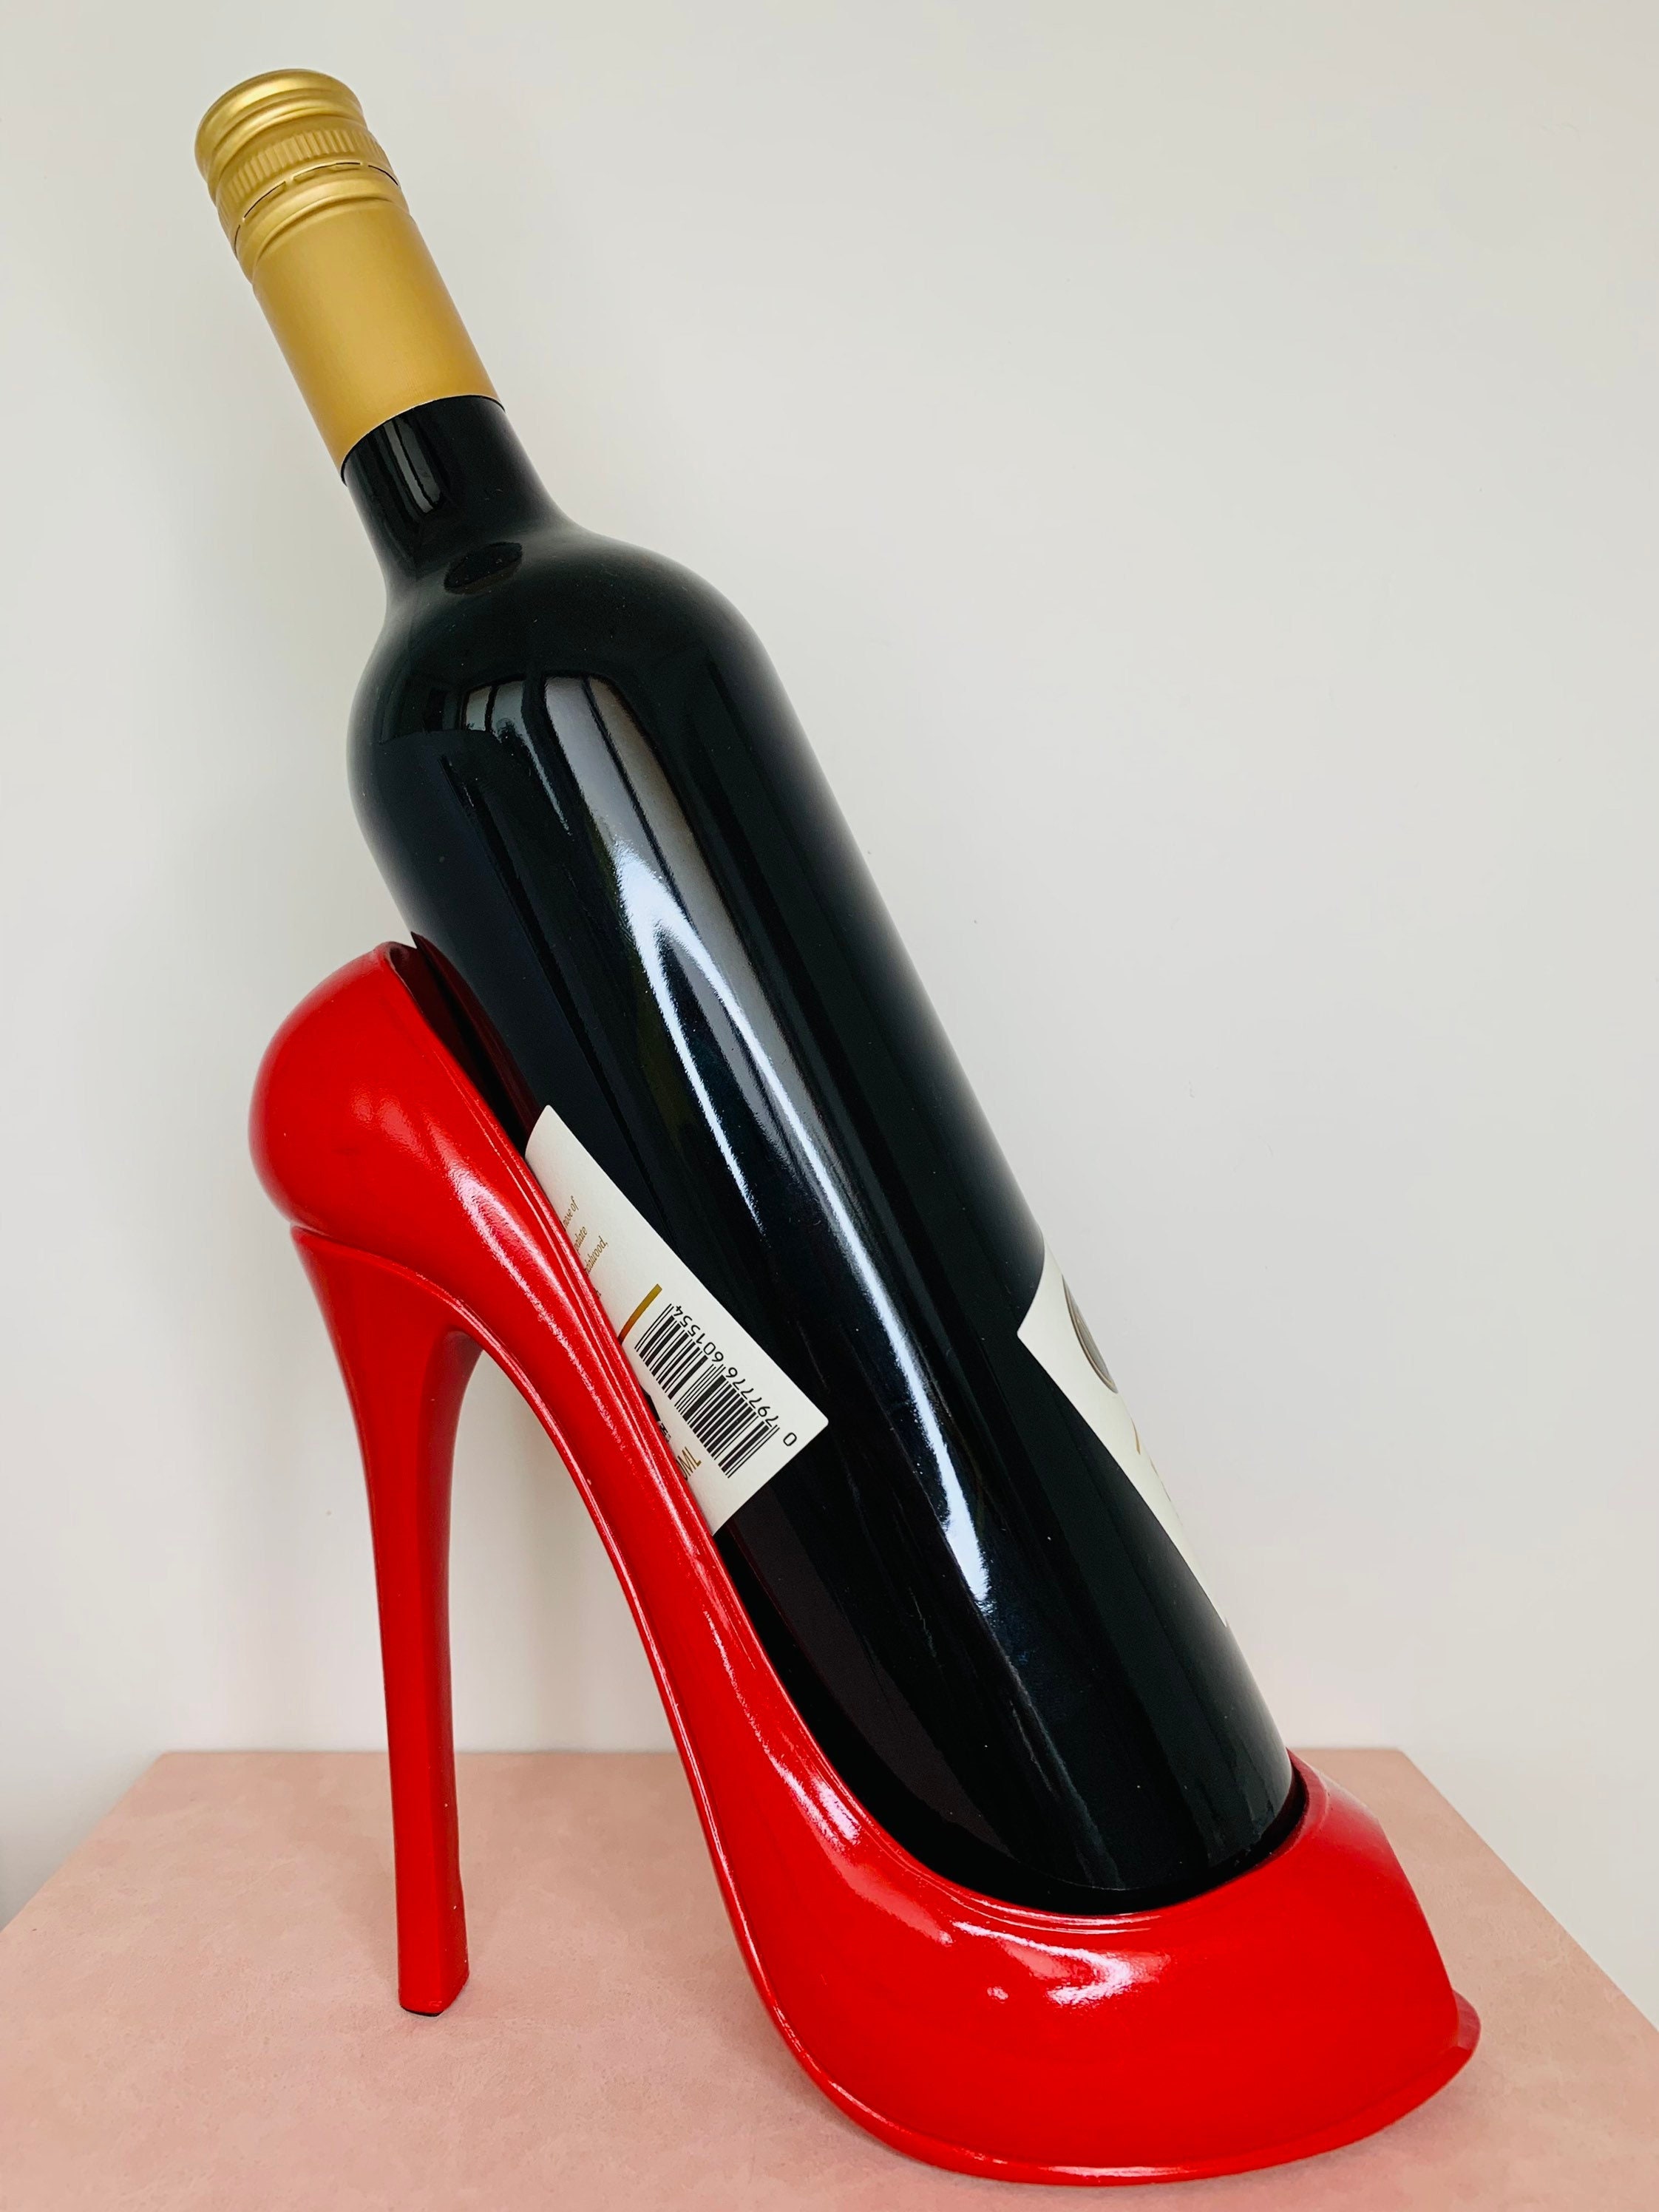 Black Counter Top or Floor Area Placed Dining Table Cabinet JHFUH Wine Rack High Heel Shoe Bottle Holder Storage Wedding Party Living Room Dining Room Display Decor Ornament Gift 